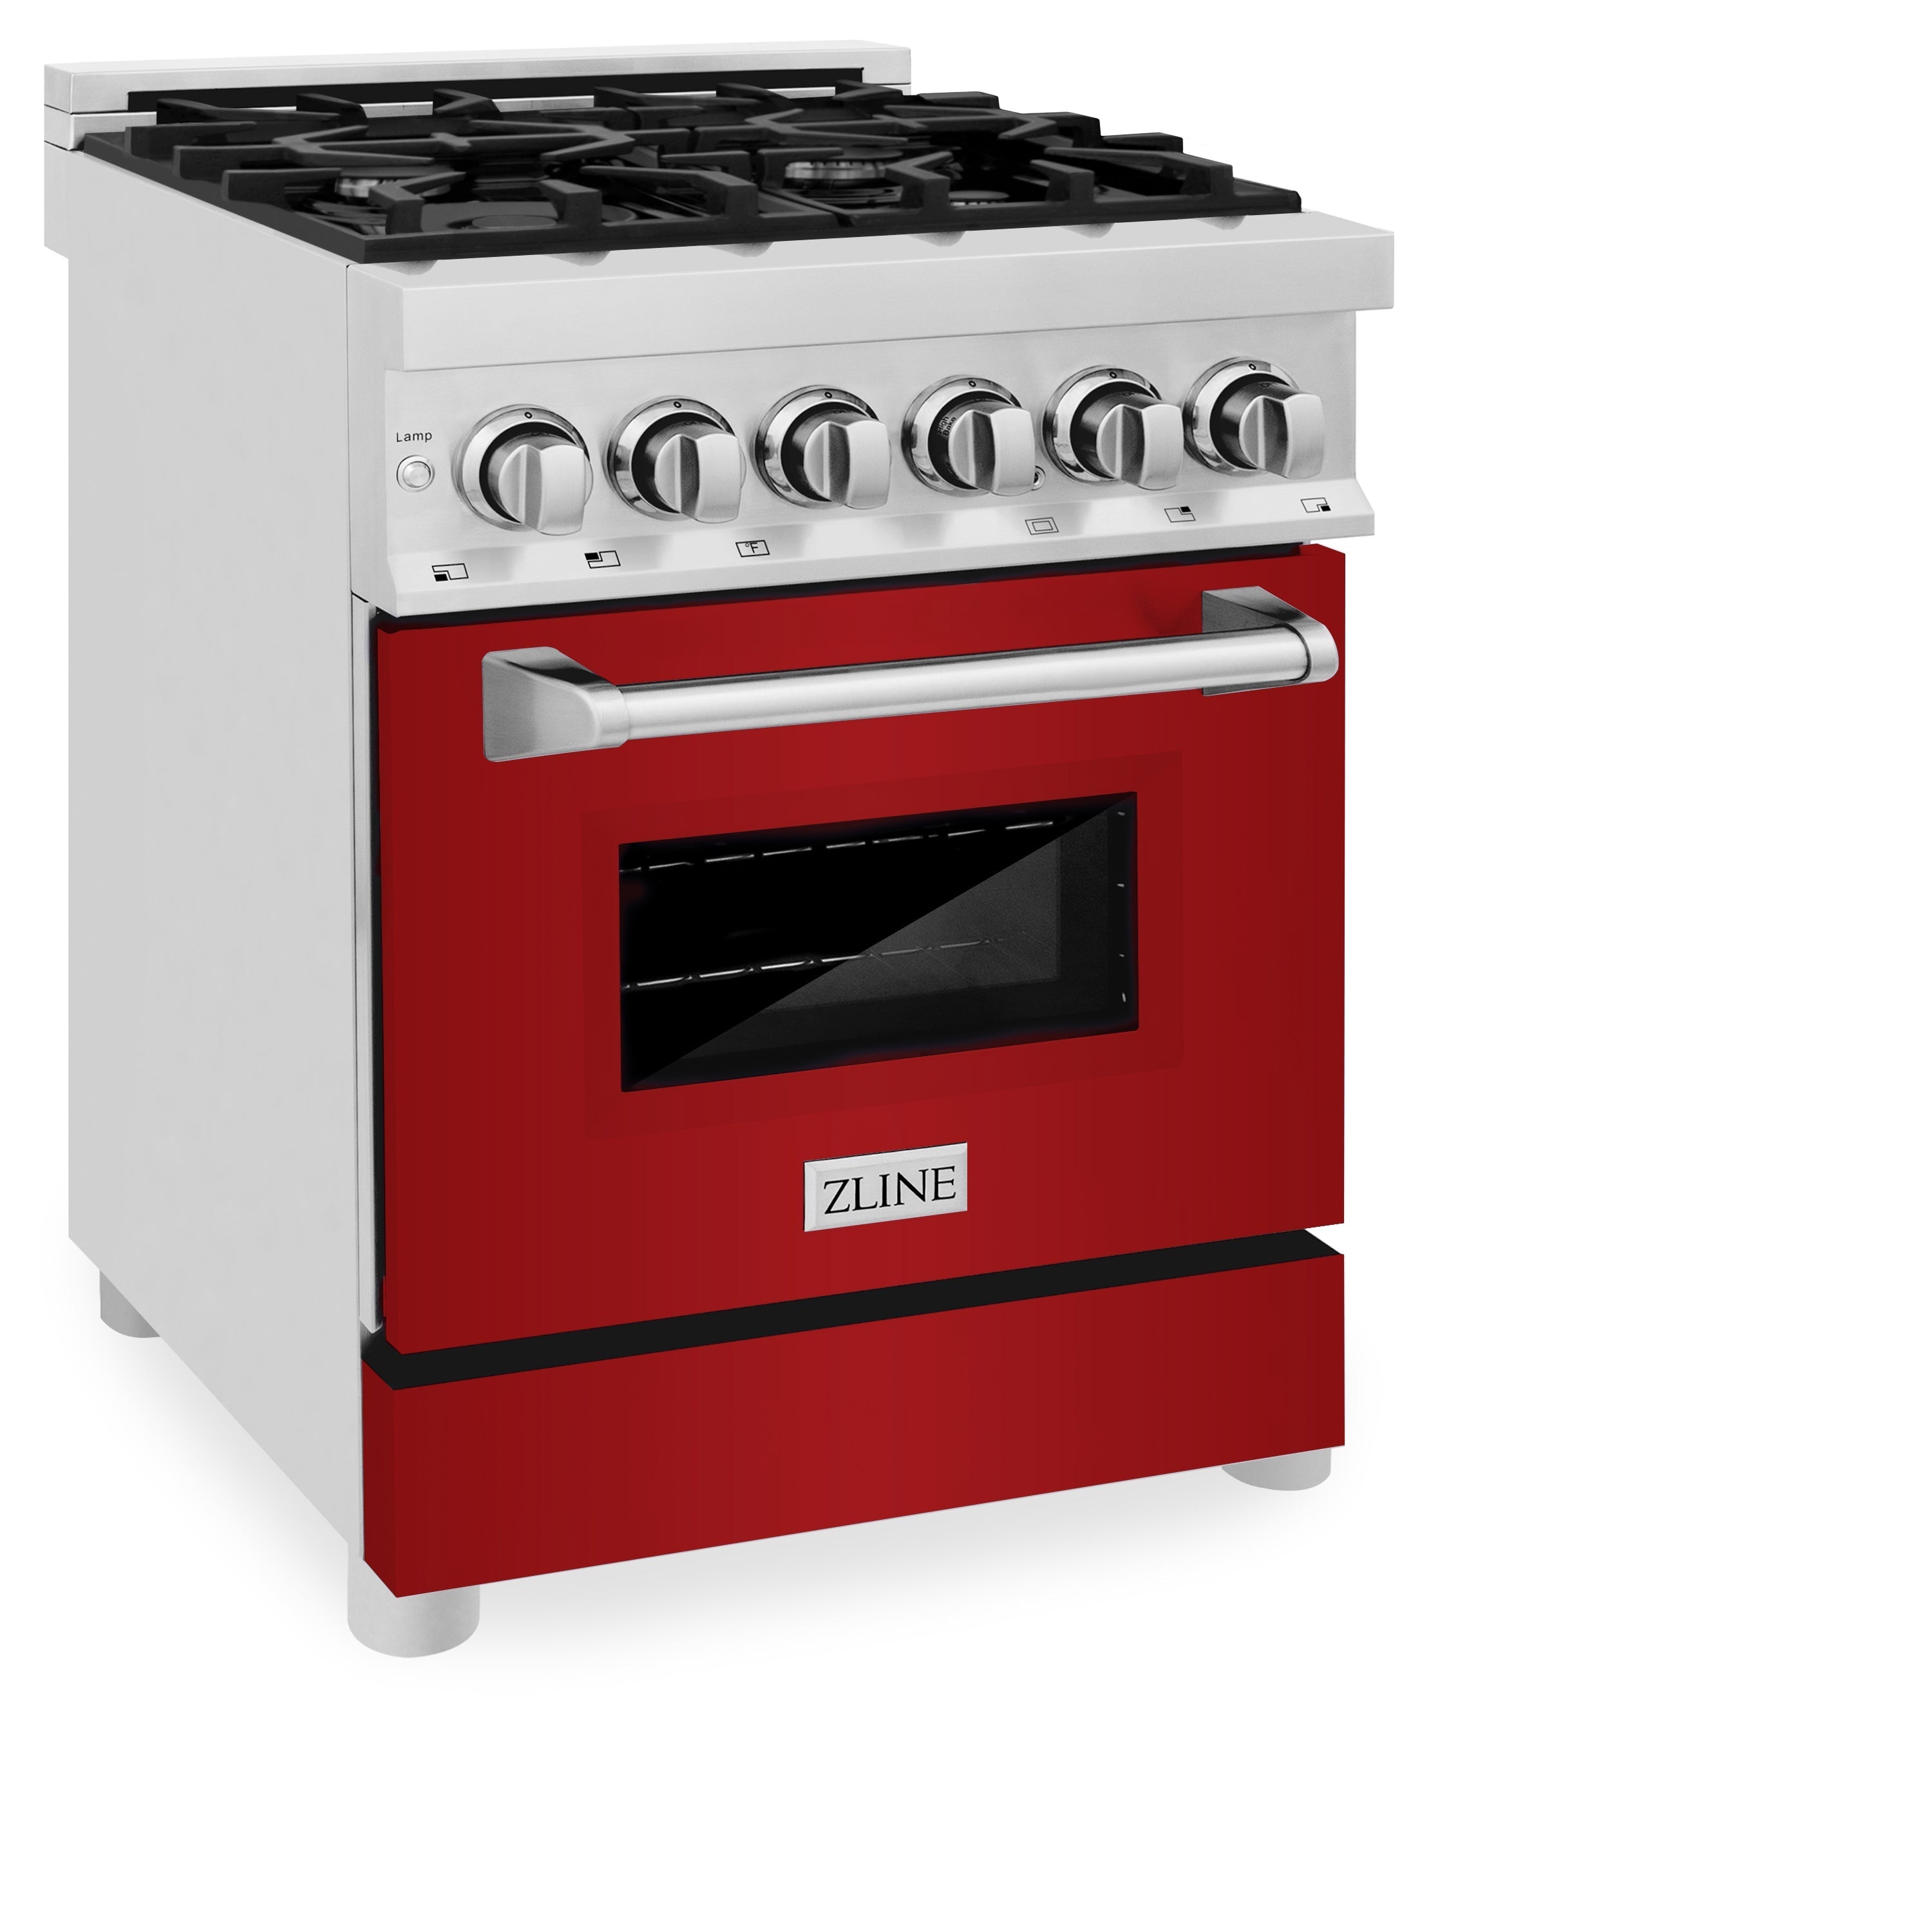 ZLINE 24" 2.8 cu. ft. Range with Gas Stove and Gas Oven in Stainless Steel and Red Gloss Door (RG-RG-24)